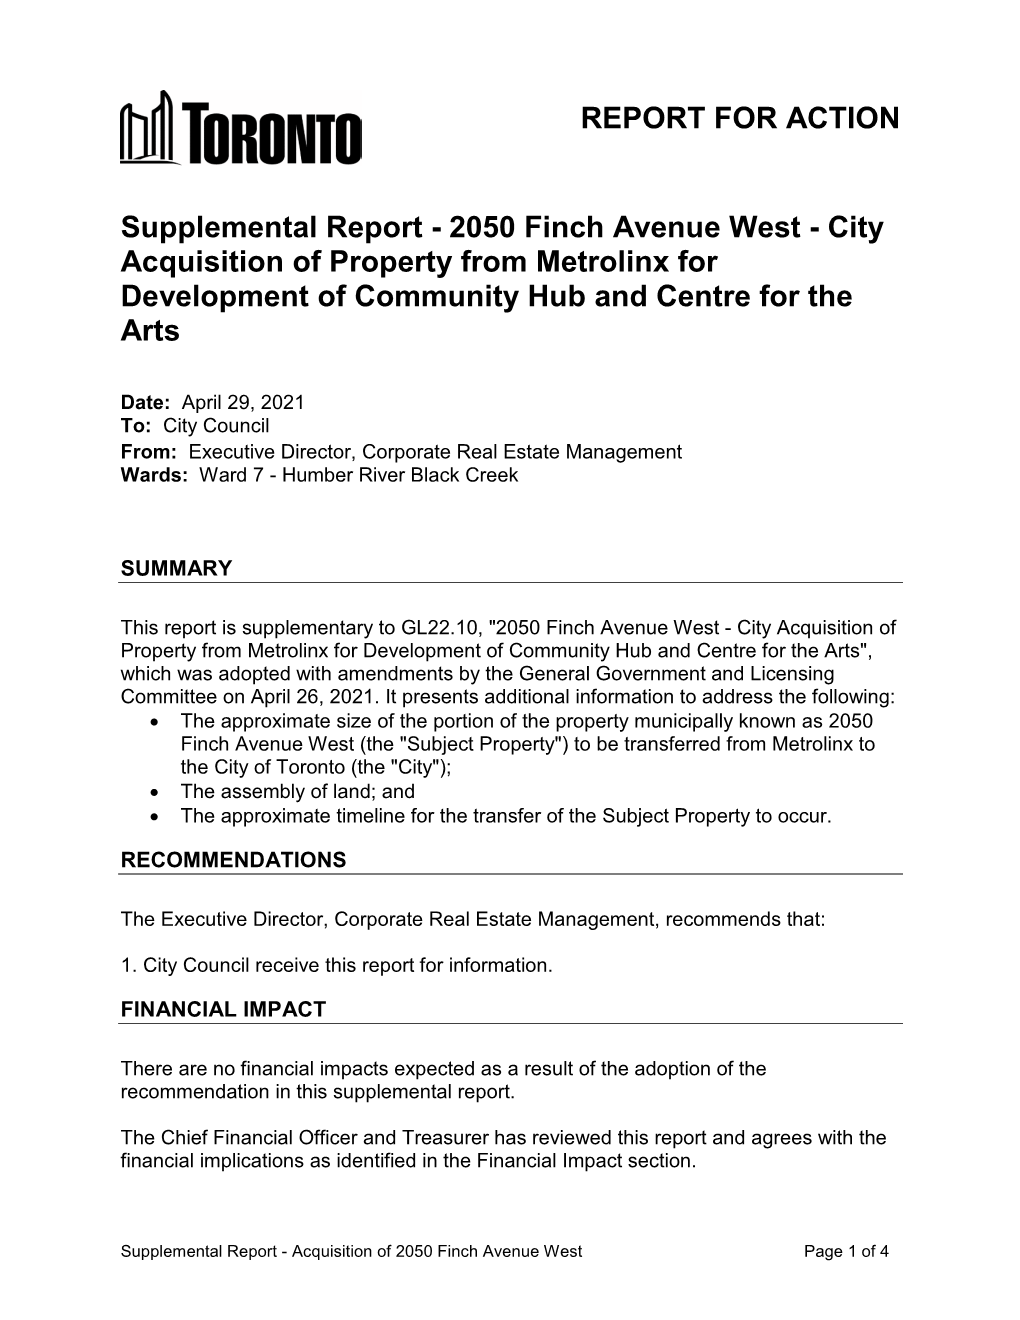 Supplemental Report - 2050 Finch Avenue West - City Acquisition of Property from Metrolinx for Development of Community Hub and Centre for the Arts